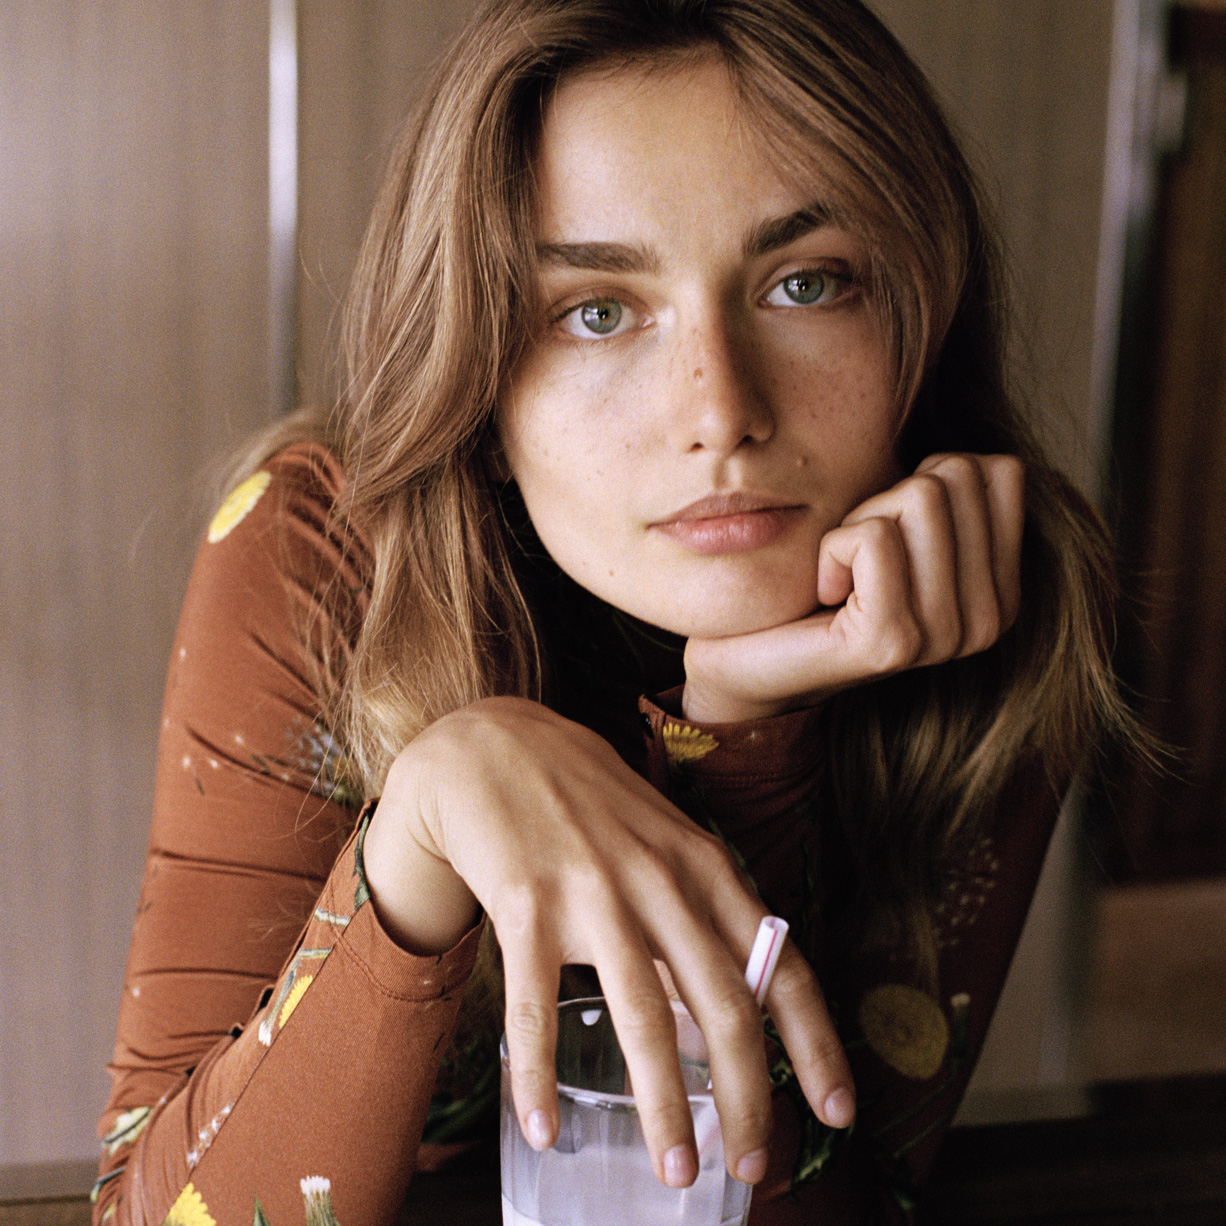 02-Andreea Diaconu by Dan Martensen for Telegraph-This Is Glamorous